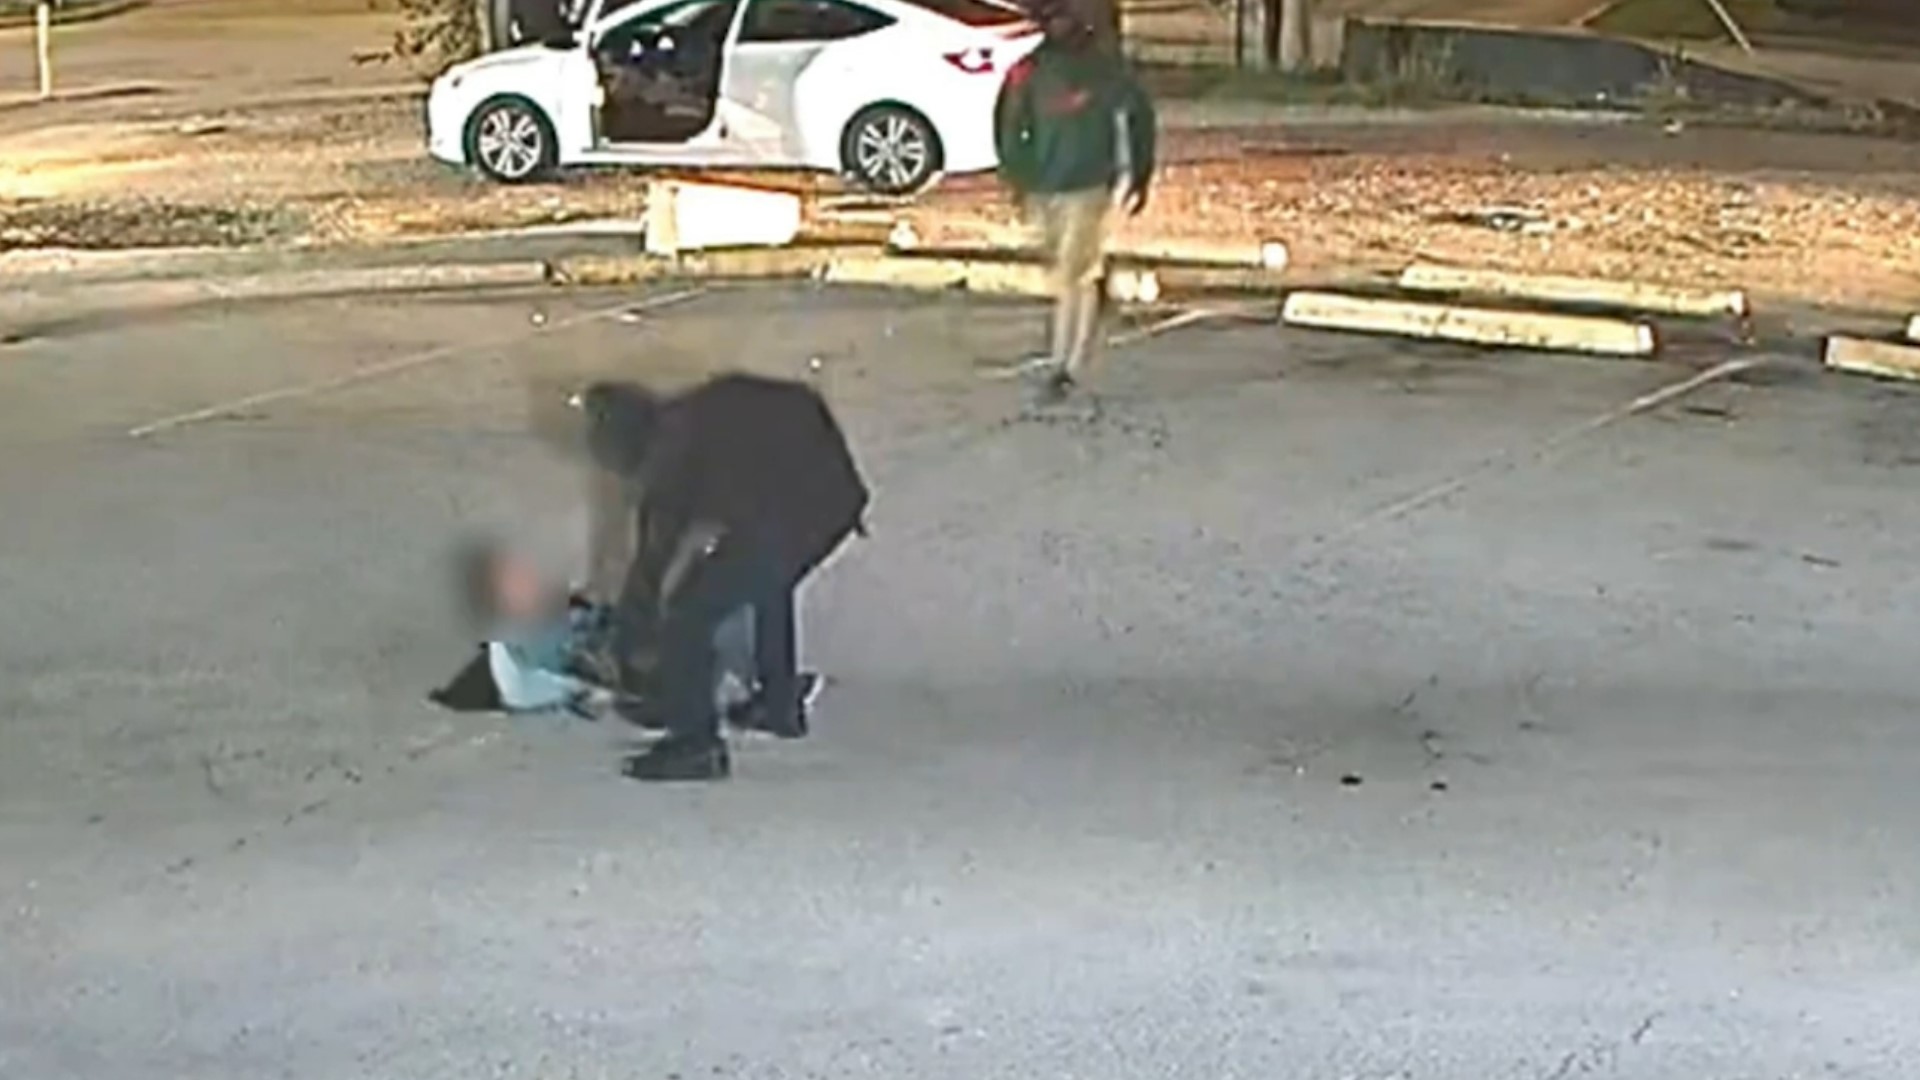 Video shows three men jump out of a car, knock her to the ground and steal from her.